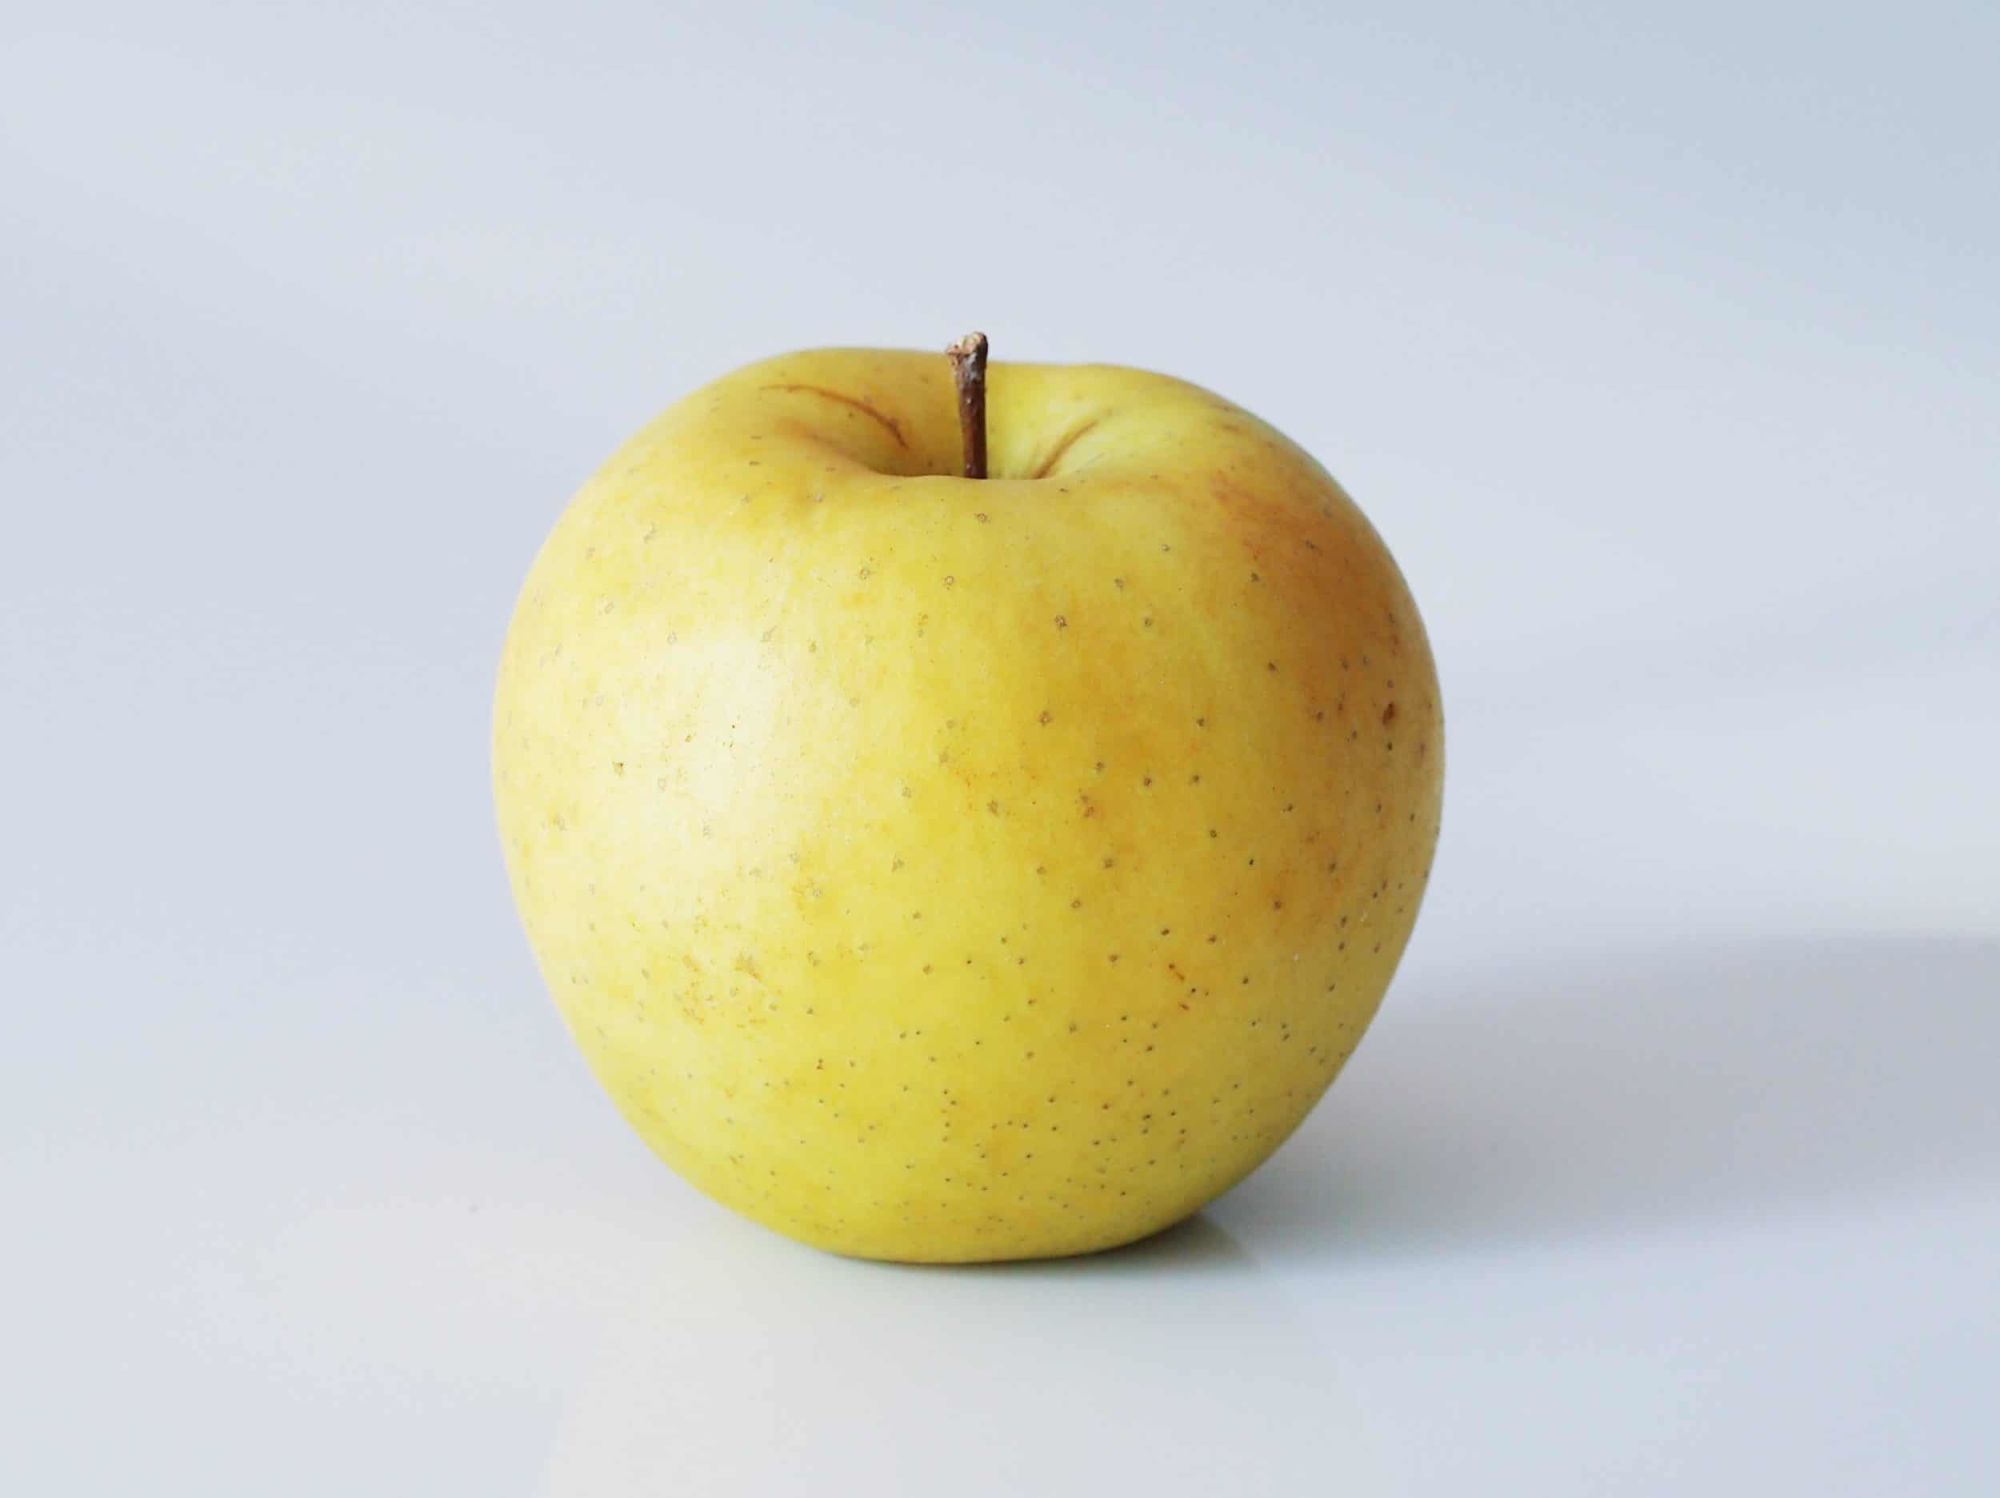 Eating it raw, cooked or baked? Choosing right variety of apple enhances  results